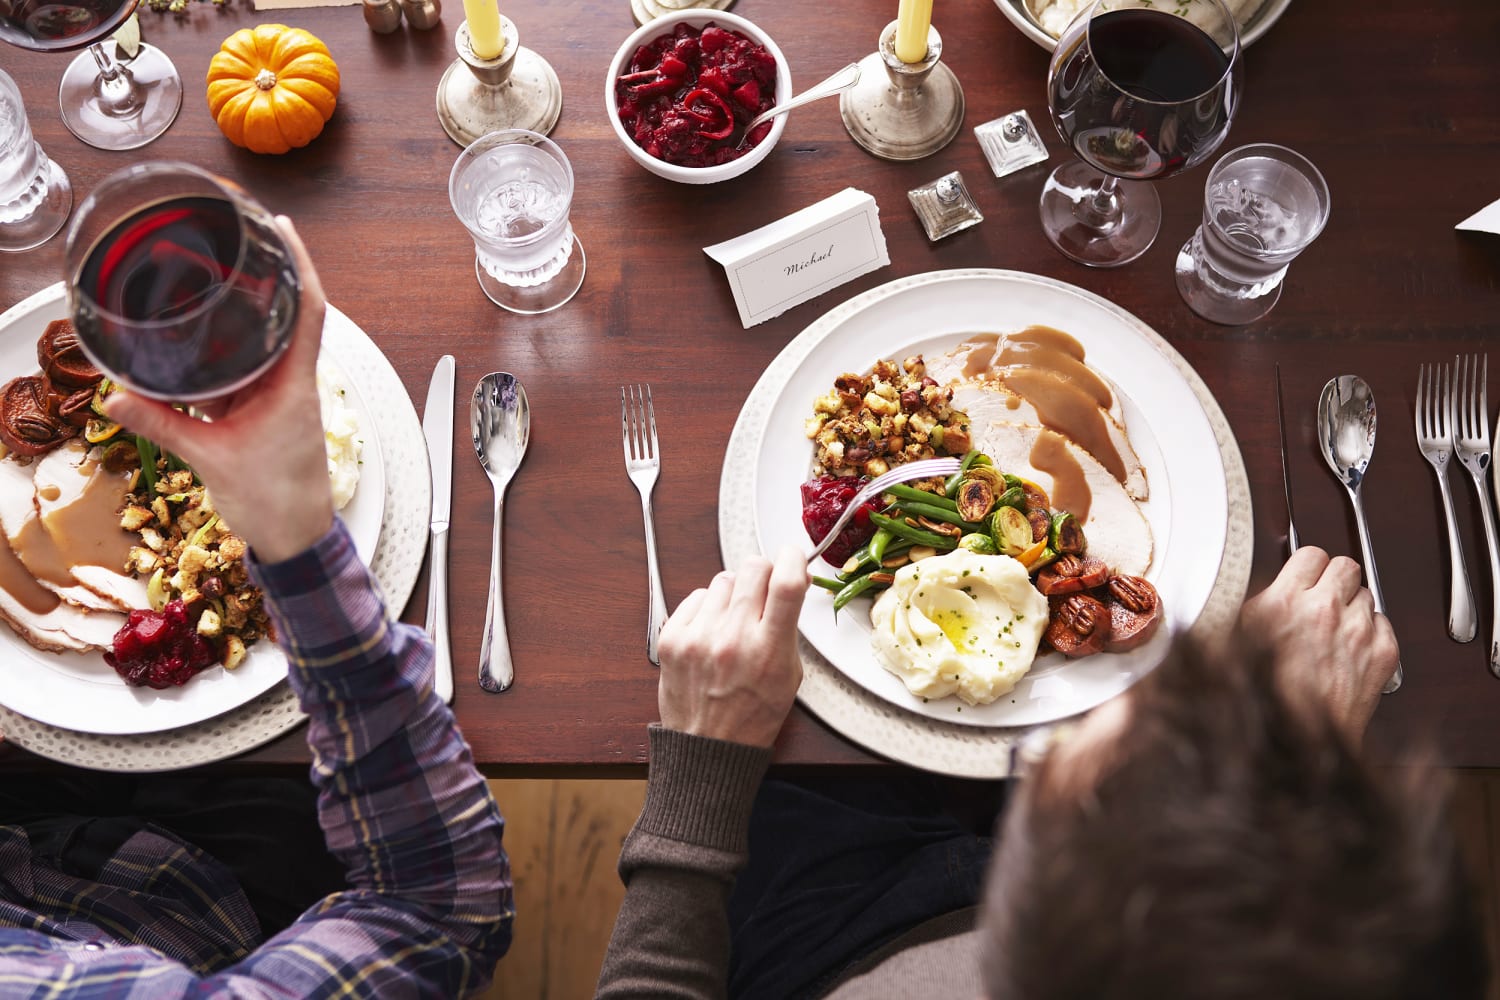 40 Eating places Open on Thanksgiving to Save You from Cooking